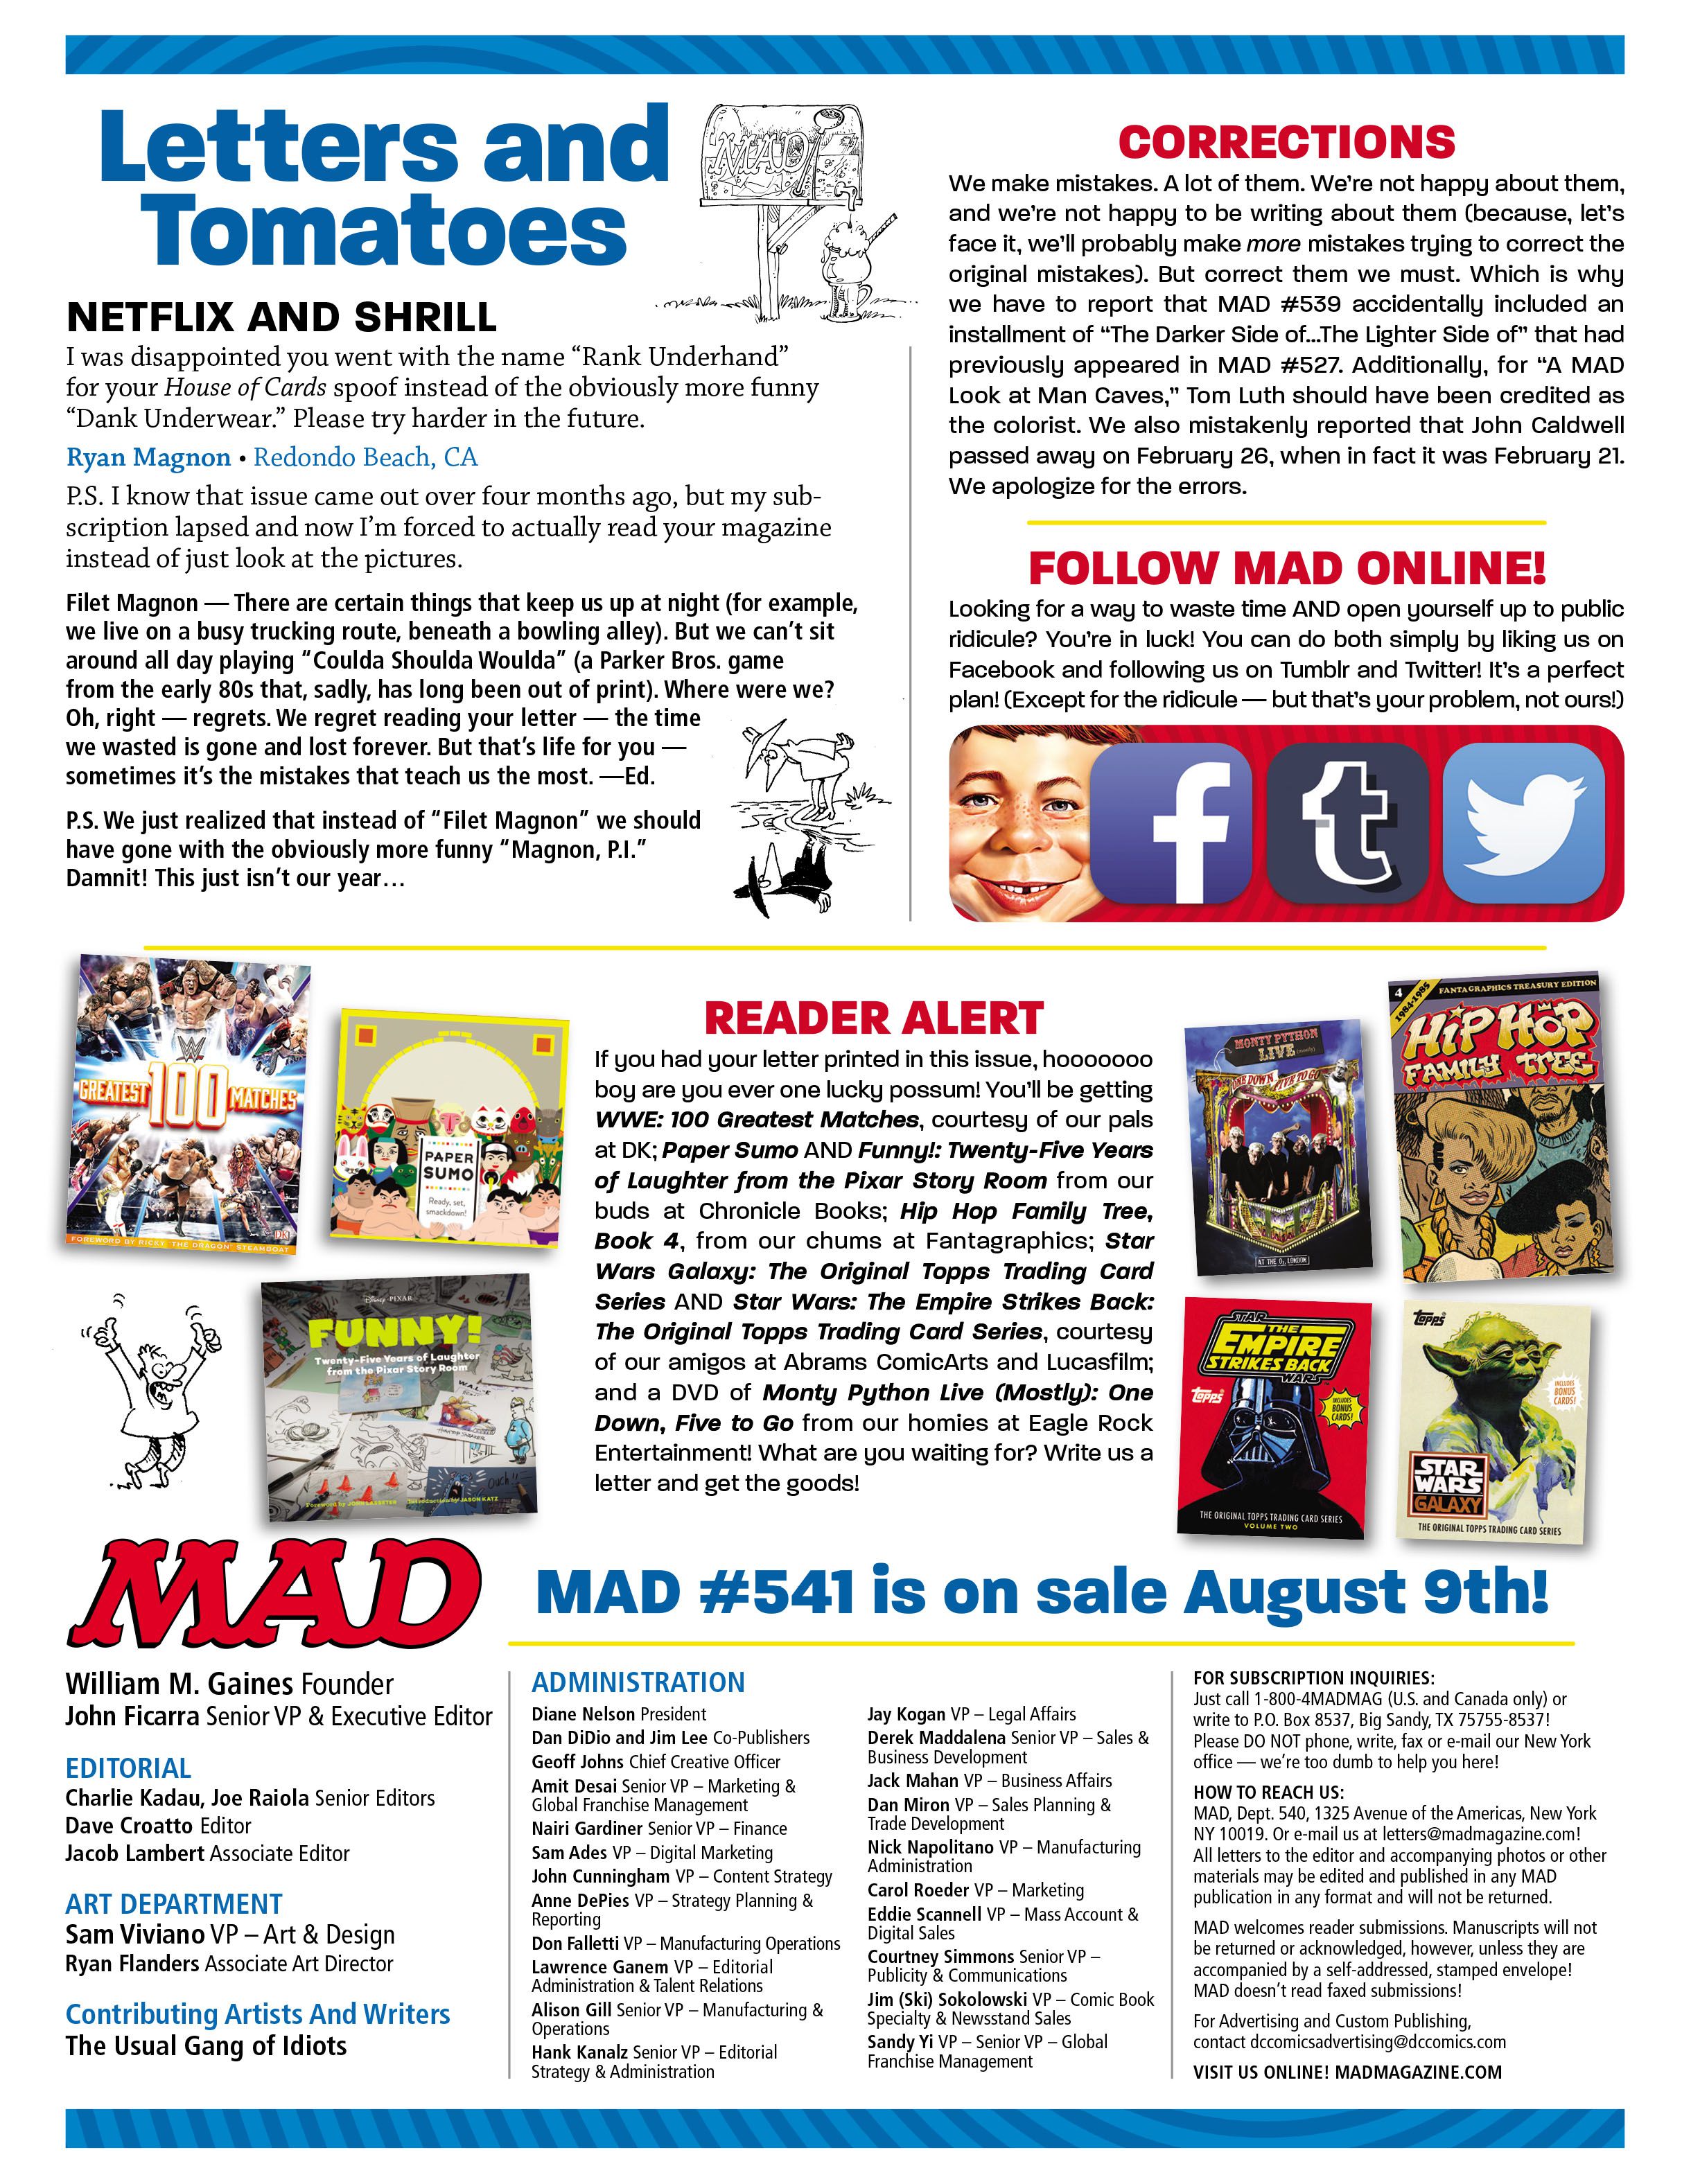 Read online MAD comic -  Issue #540 - 6